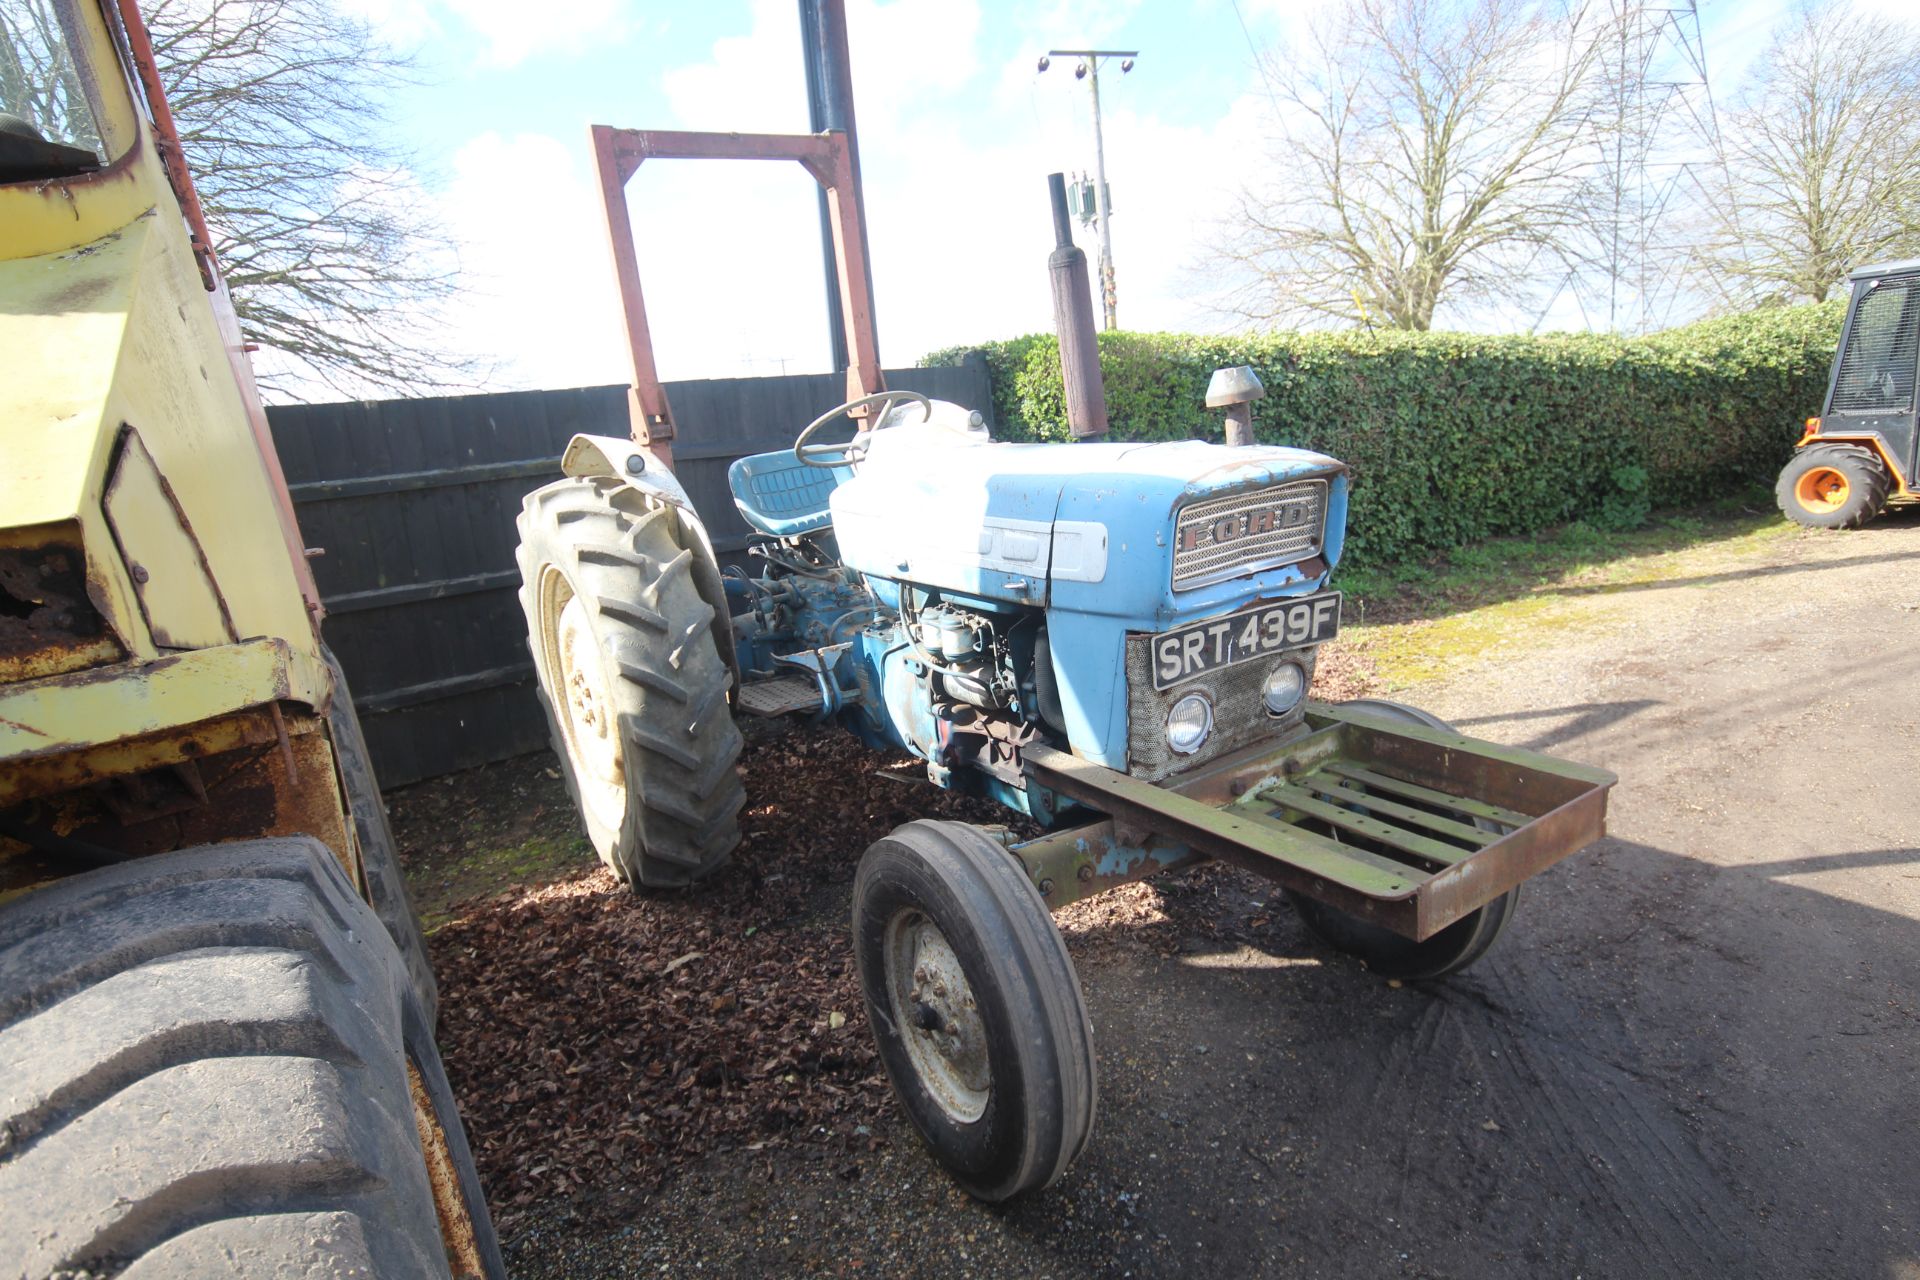 Ford 4000 Pre-Force 2WD tractor. Registration SRT 439F (expired). 13.6R36 rear wheels and tyres @